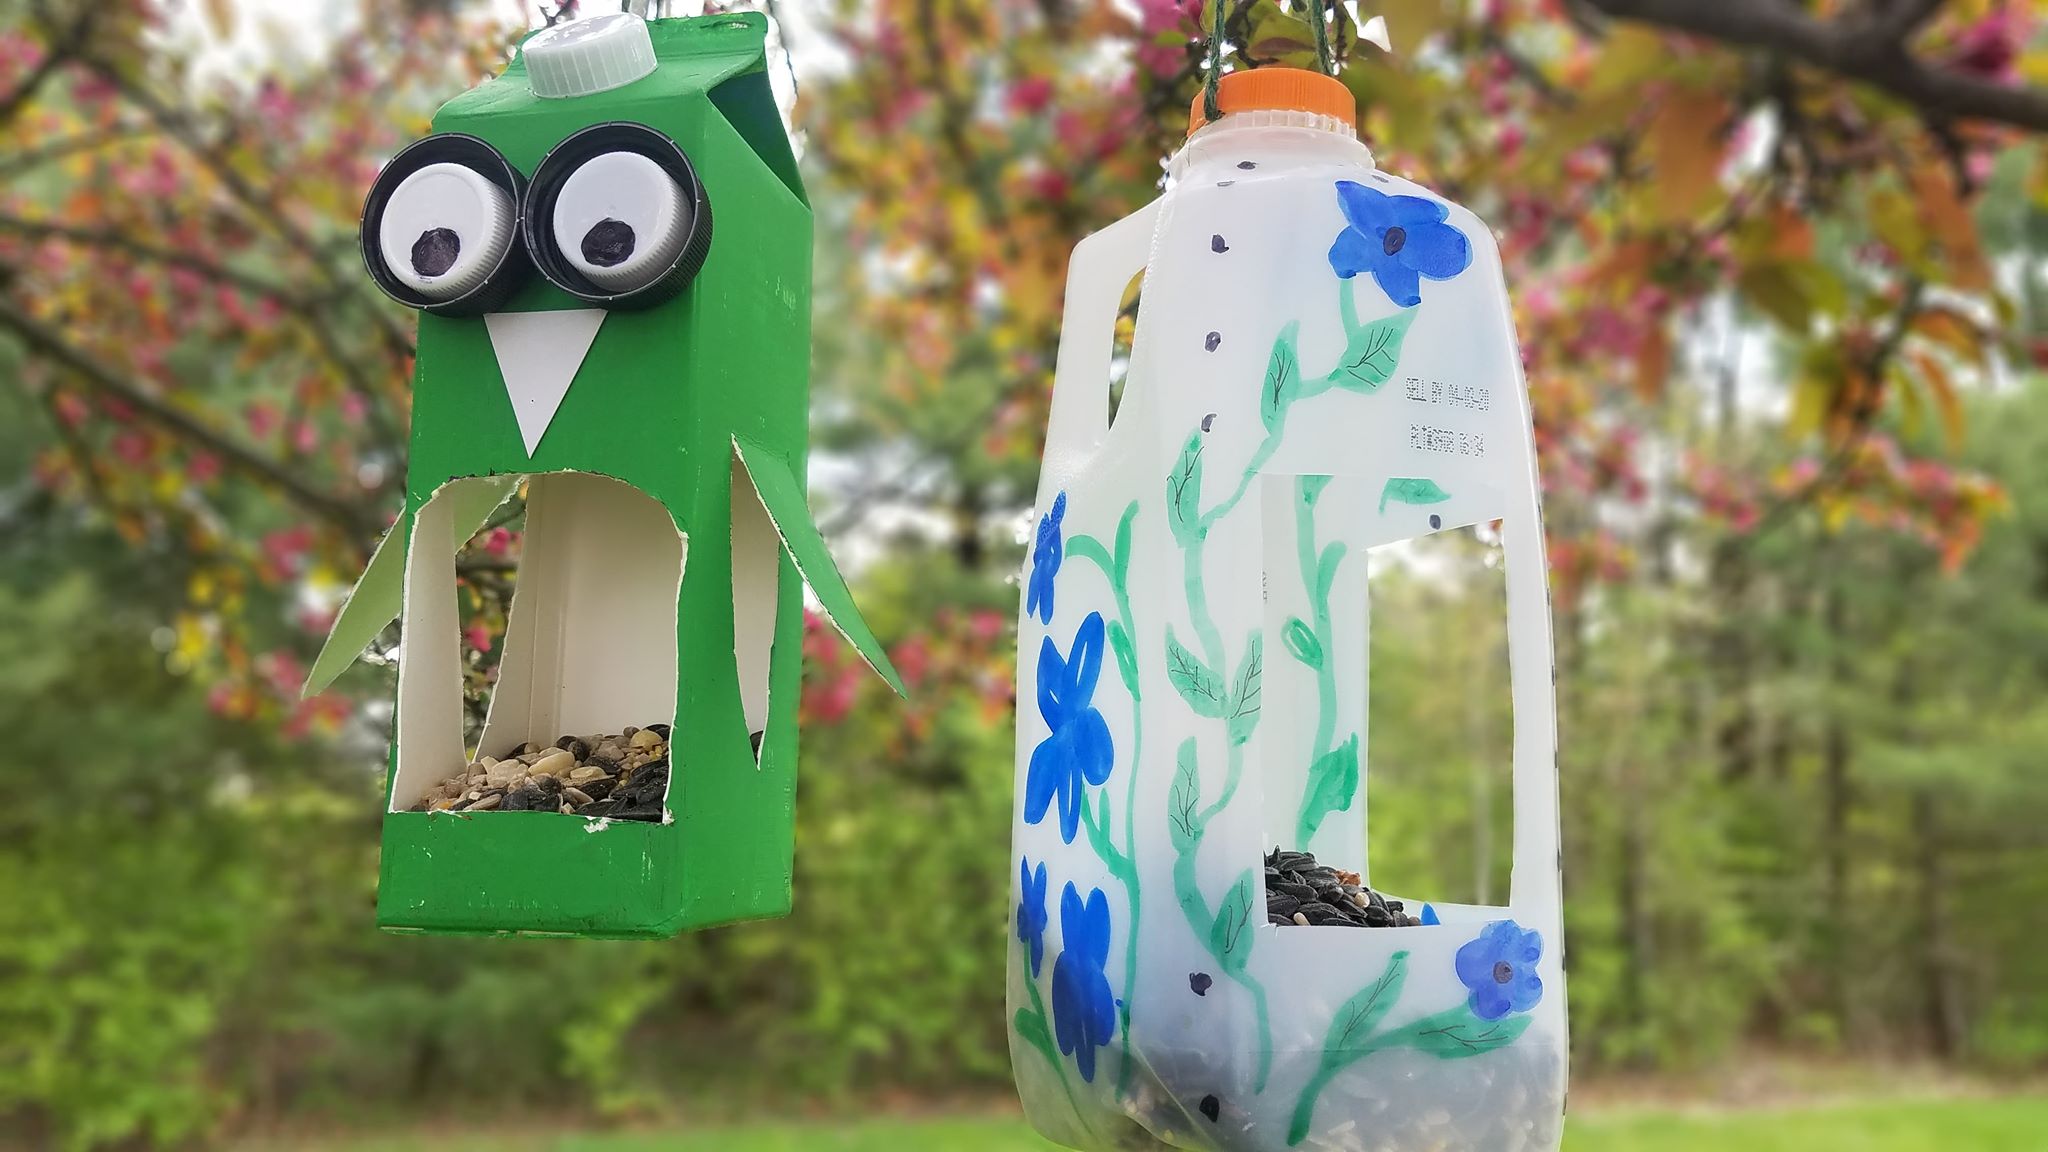 How to Make a Bird-feeder From Water-bottles! (tutorial/instructions)